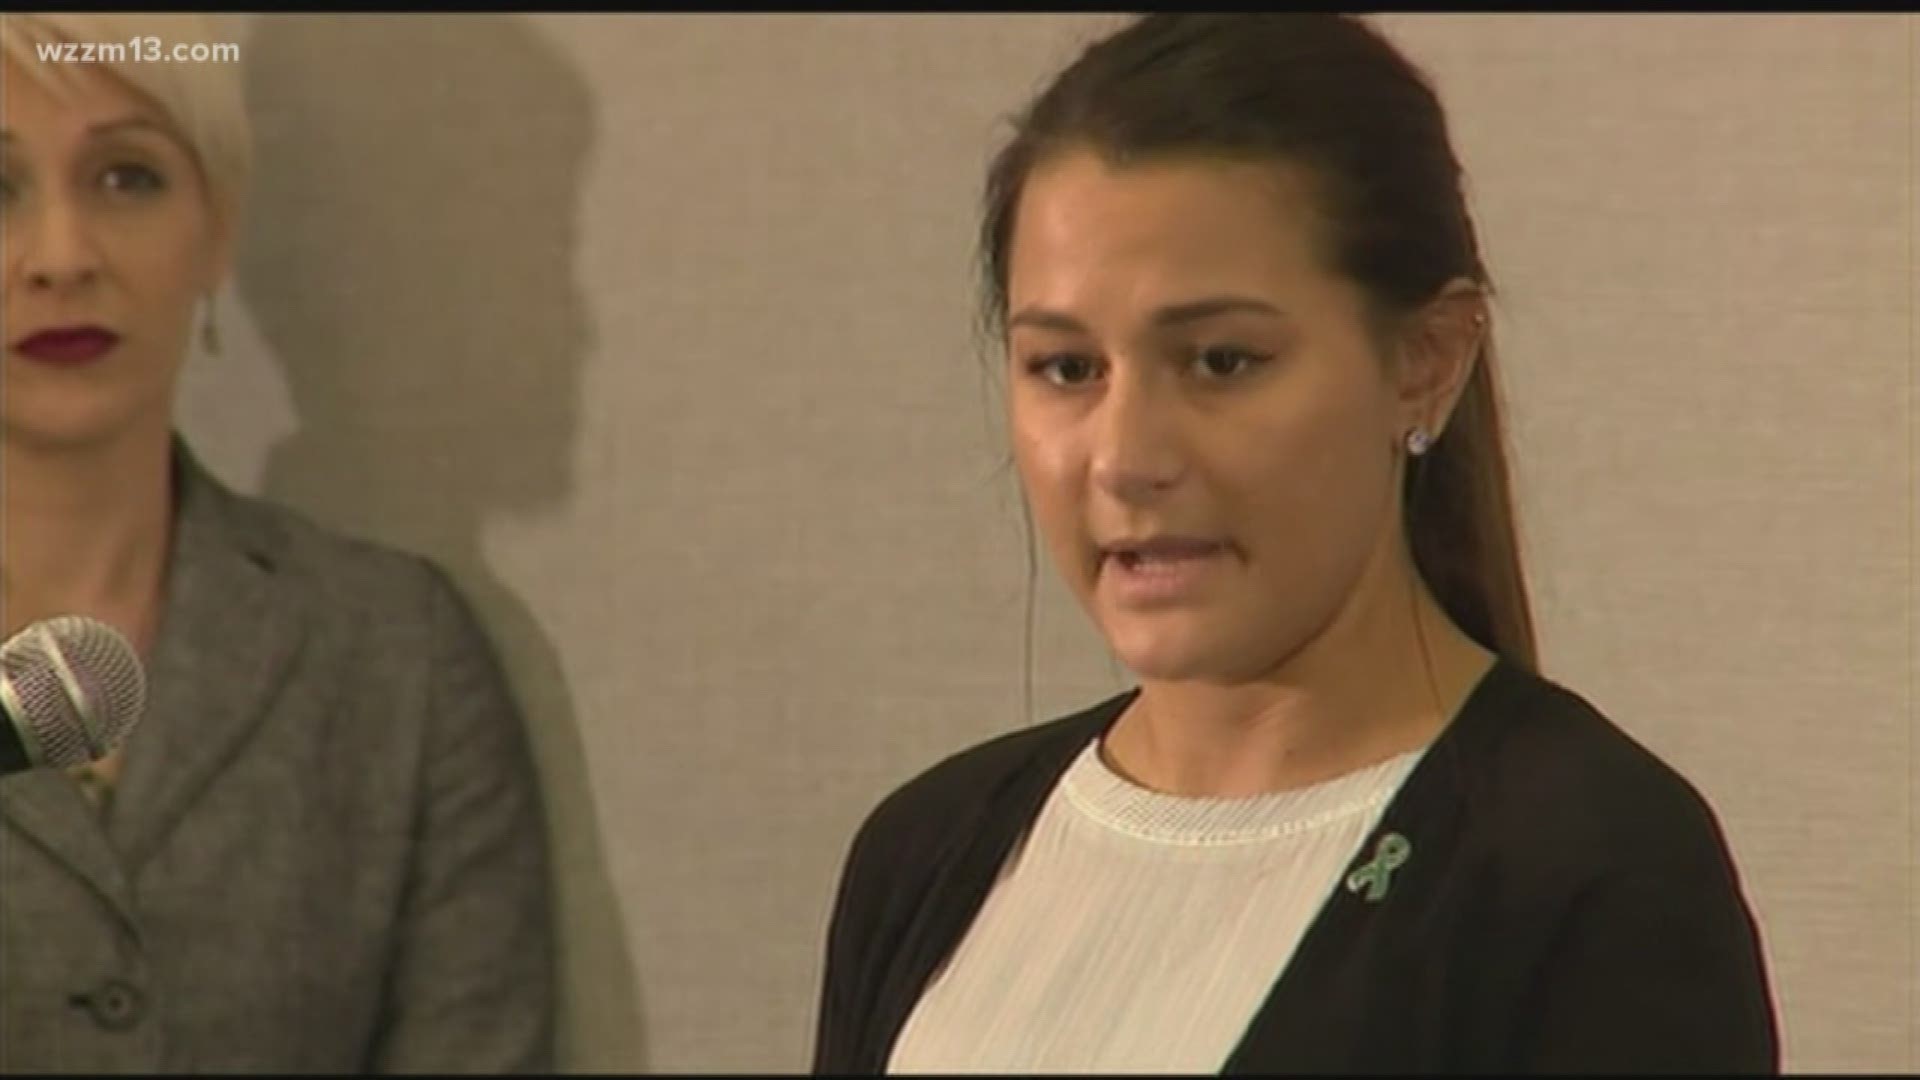 A Michigan State University student is speaking publicly a year after filing a lawsuit against the school alleging that three former men's basketball players raped her in 2015 and that she was discouraged by counseling center staff from reporting what happened.